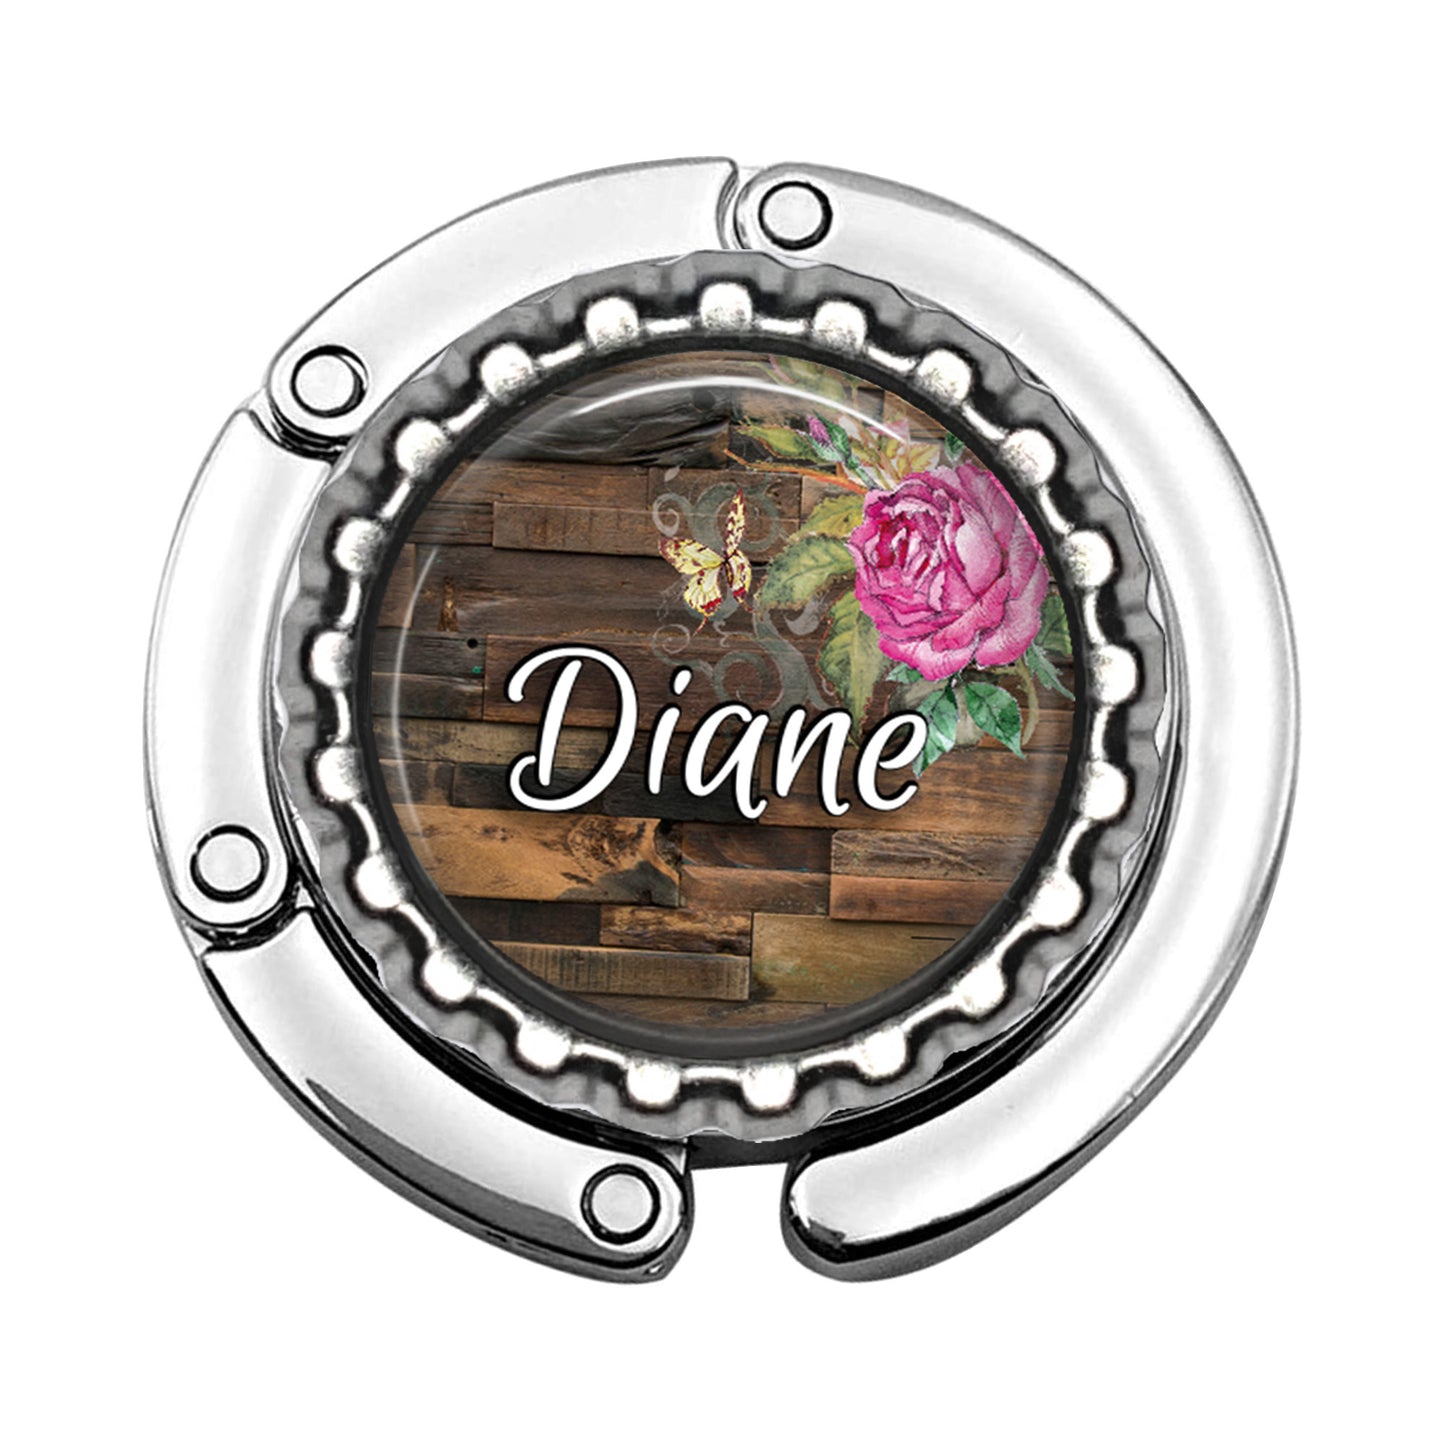 a wooden and metal plate with a rose on it